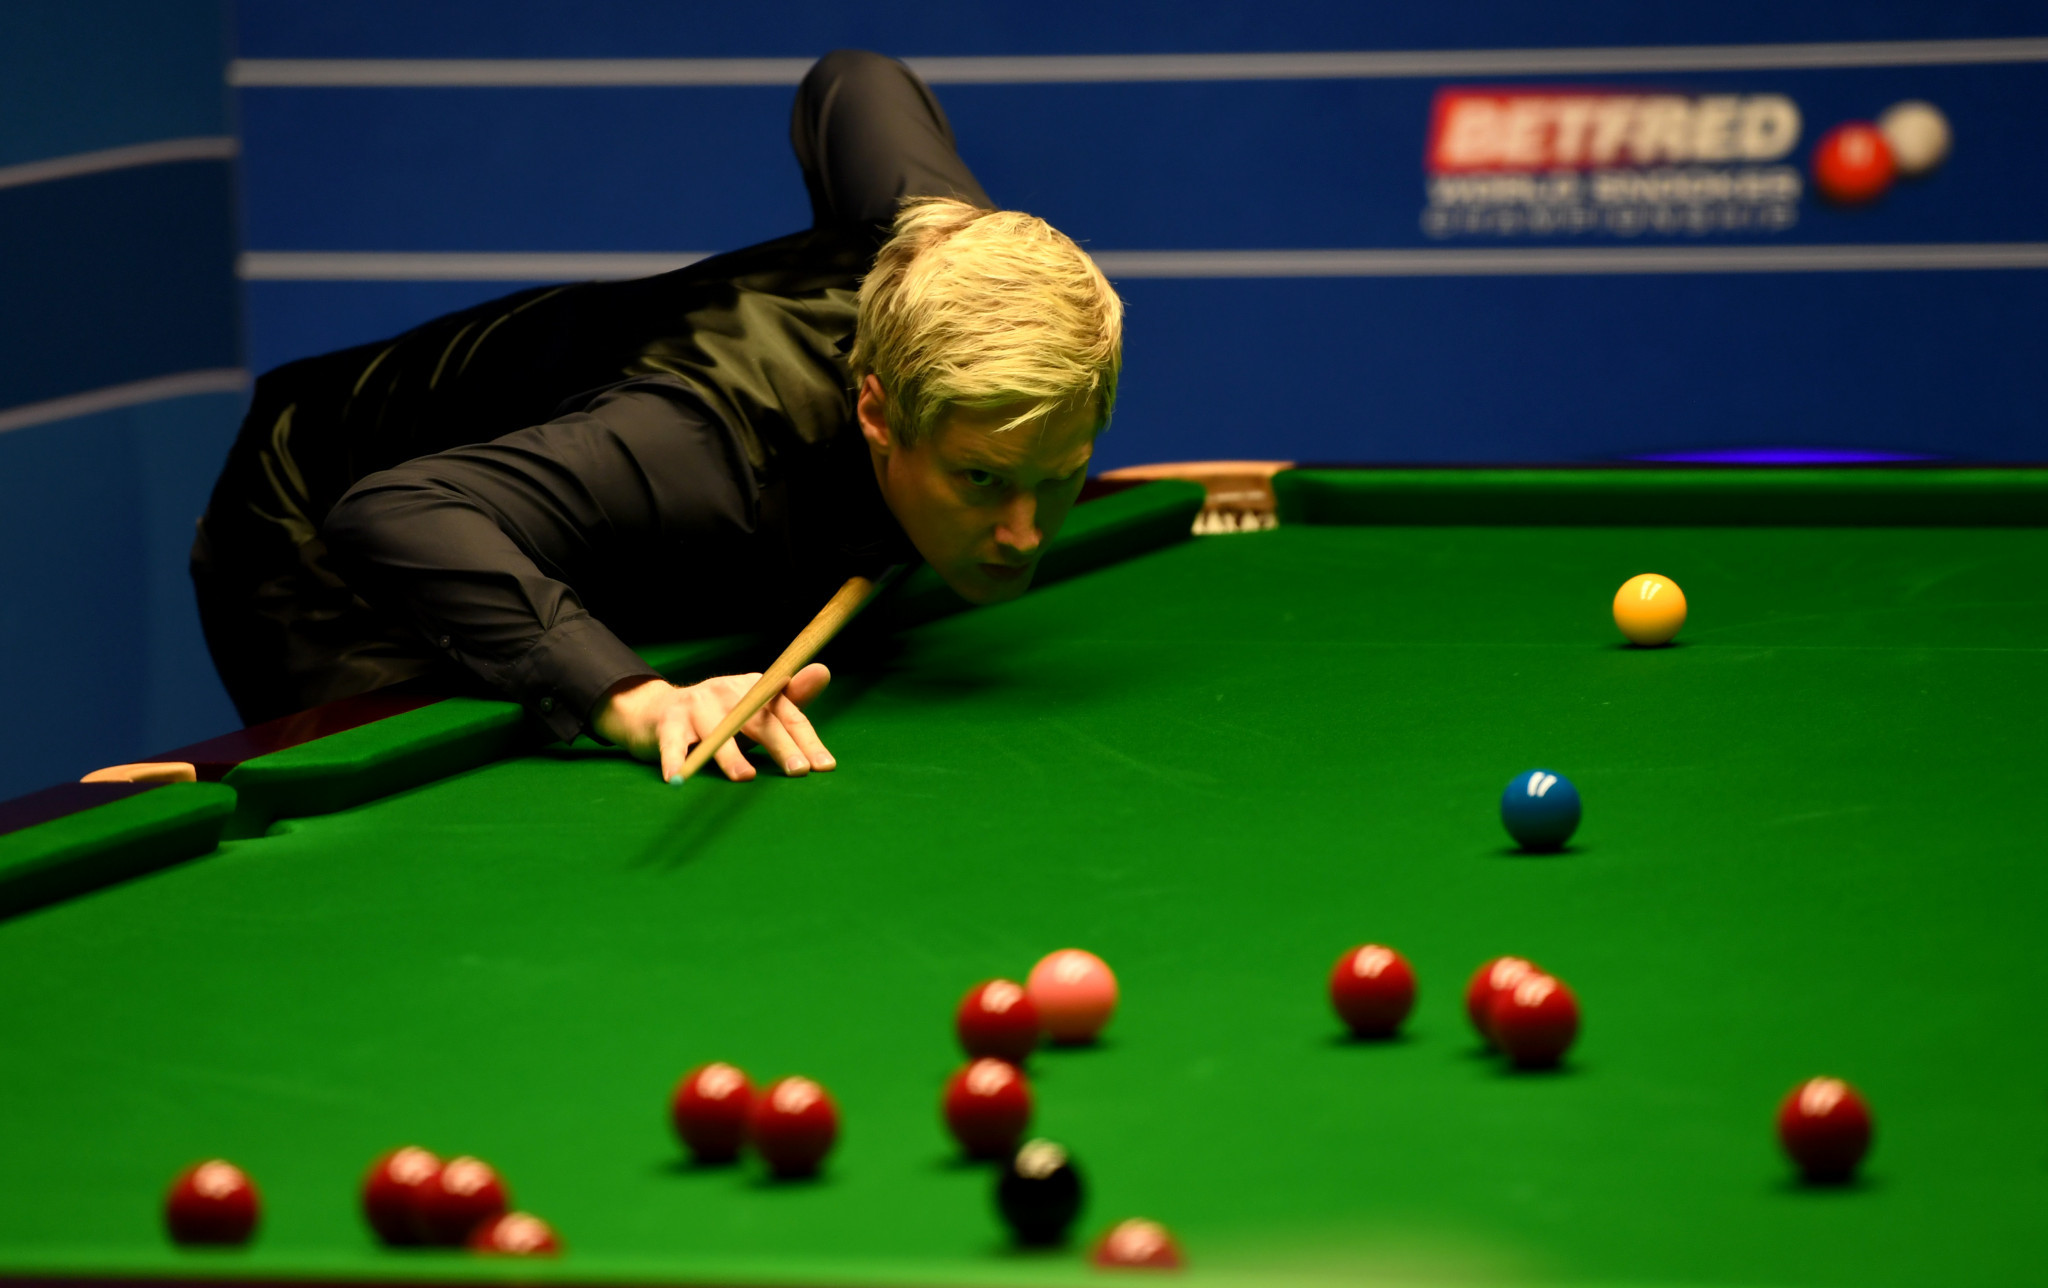 Australia's Neil Robertson, the second seed, reached the last eight of the World Snooker Championship after victory over Barry Hawkins ©Getty Images